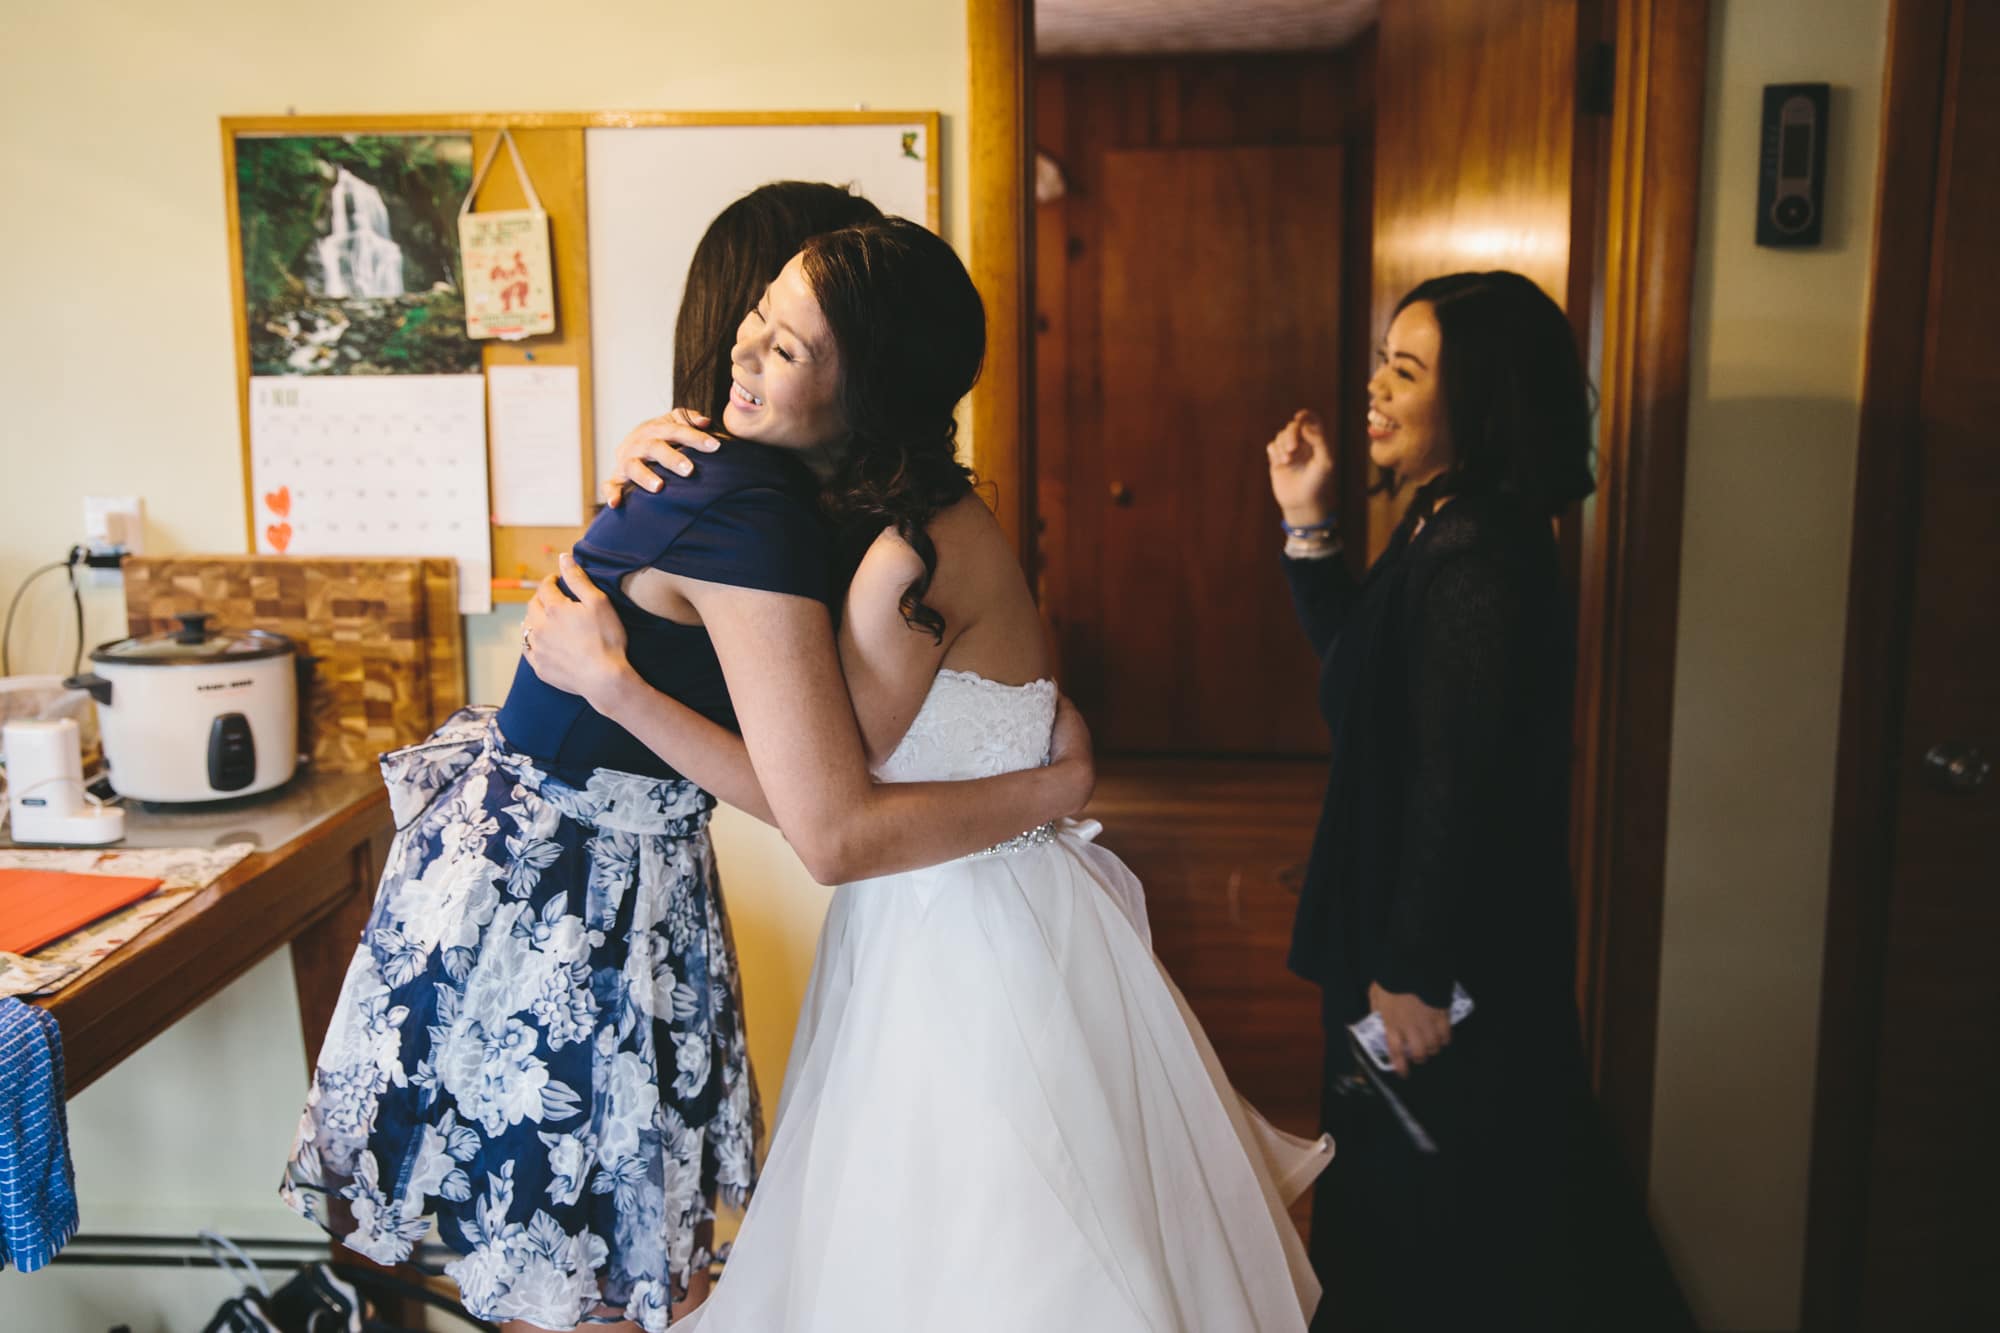 A documentary photograph of a bride hugging her friend while they get ready for a tower hill wedding in Boylston, Massachusetts